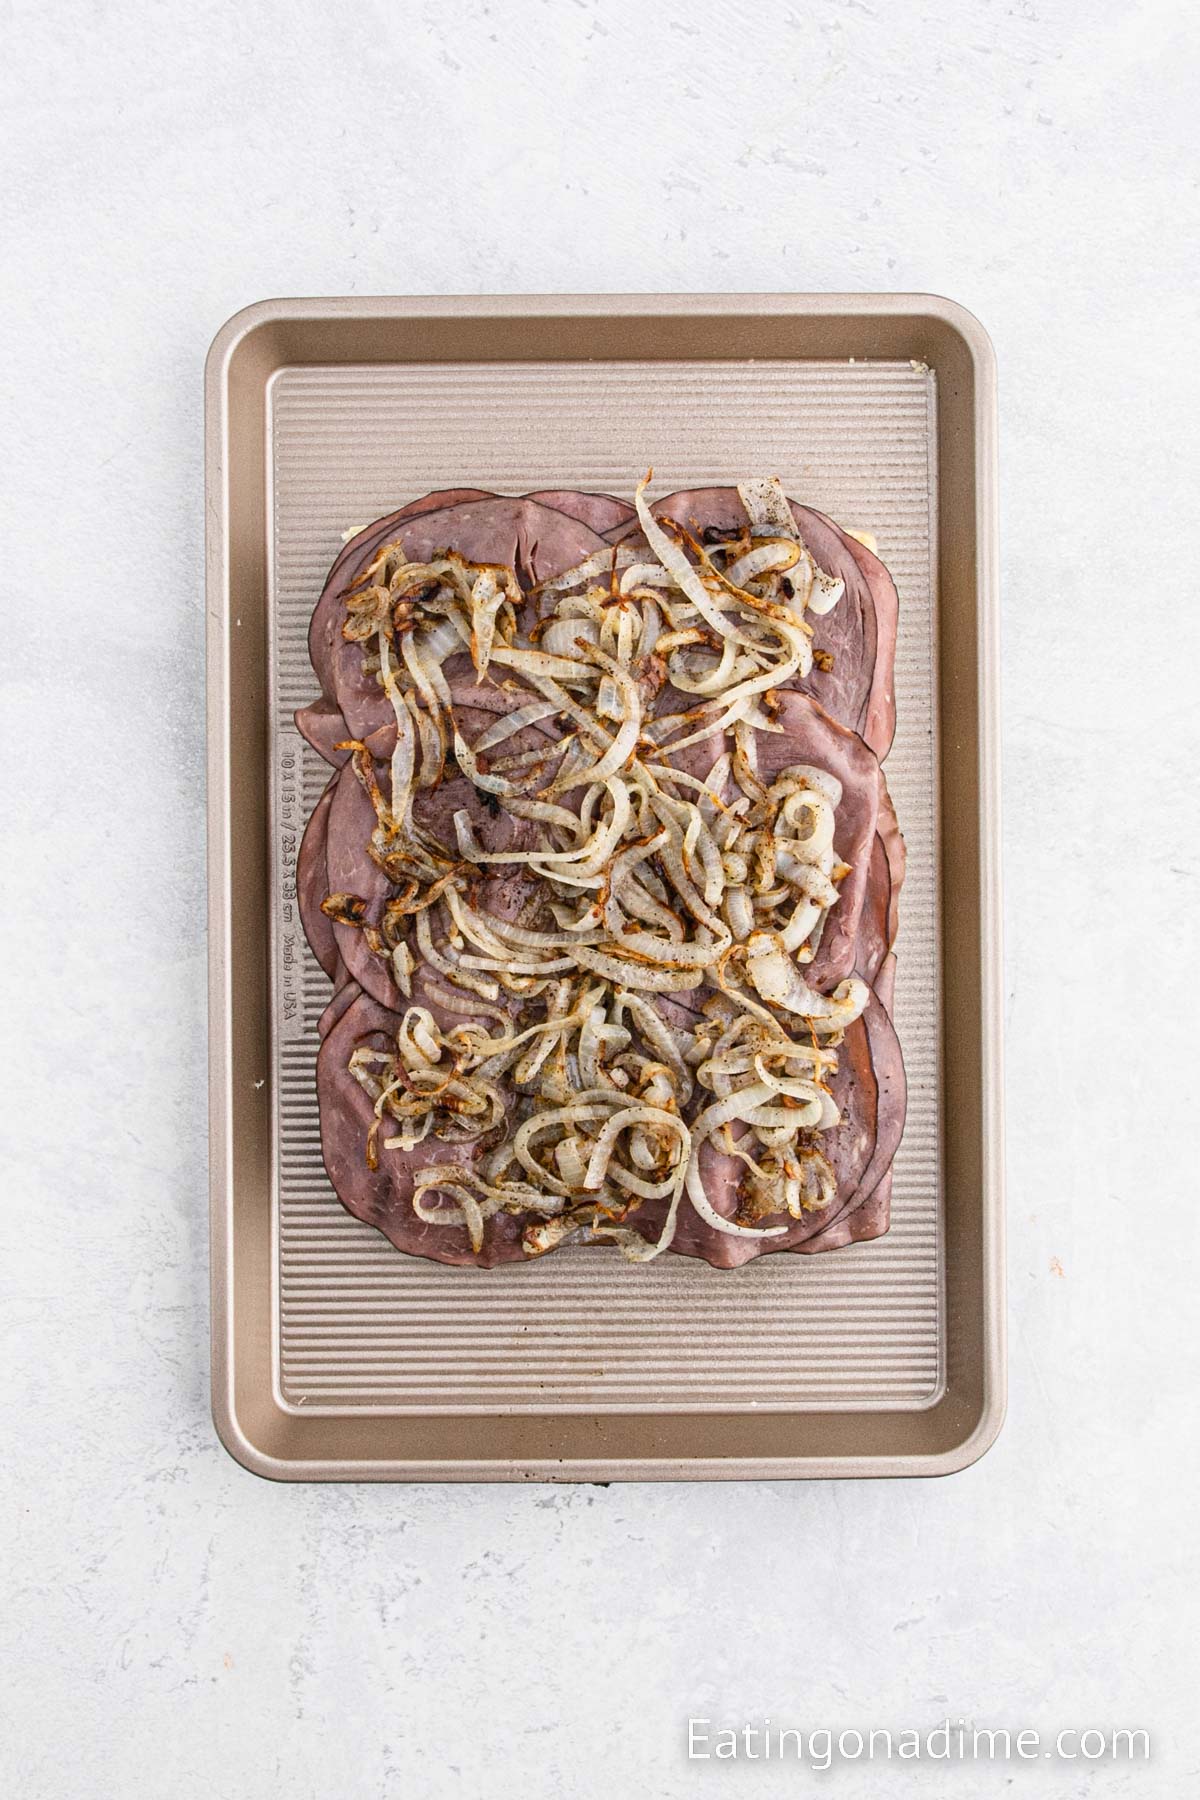 Topping the roast beef with the cooked onions